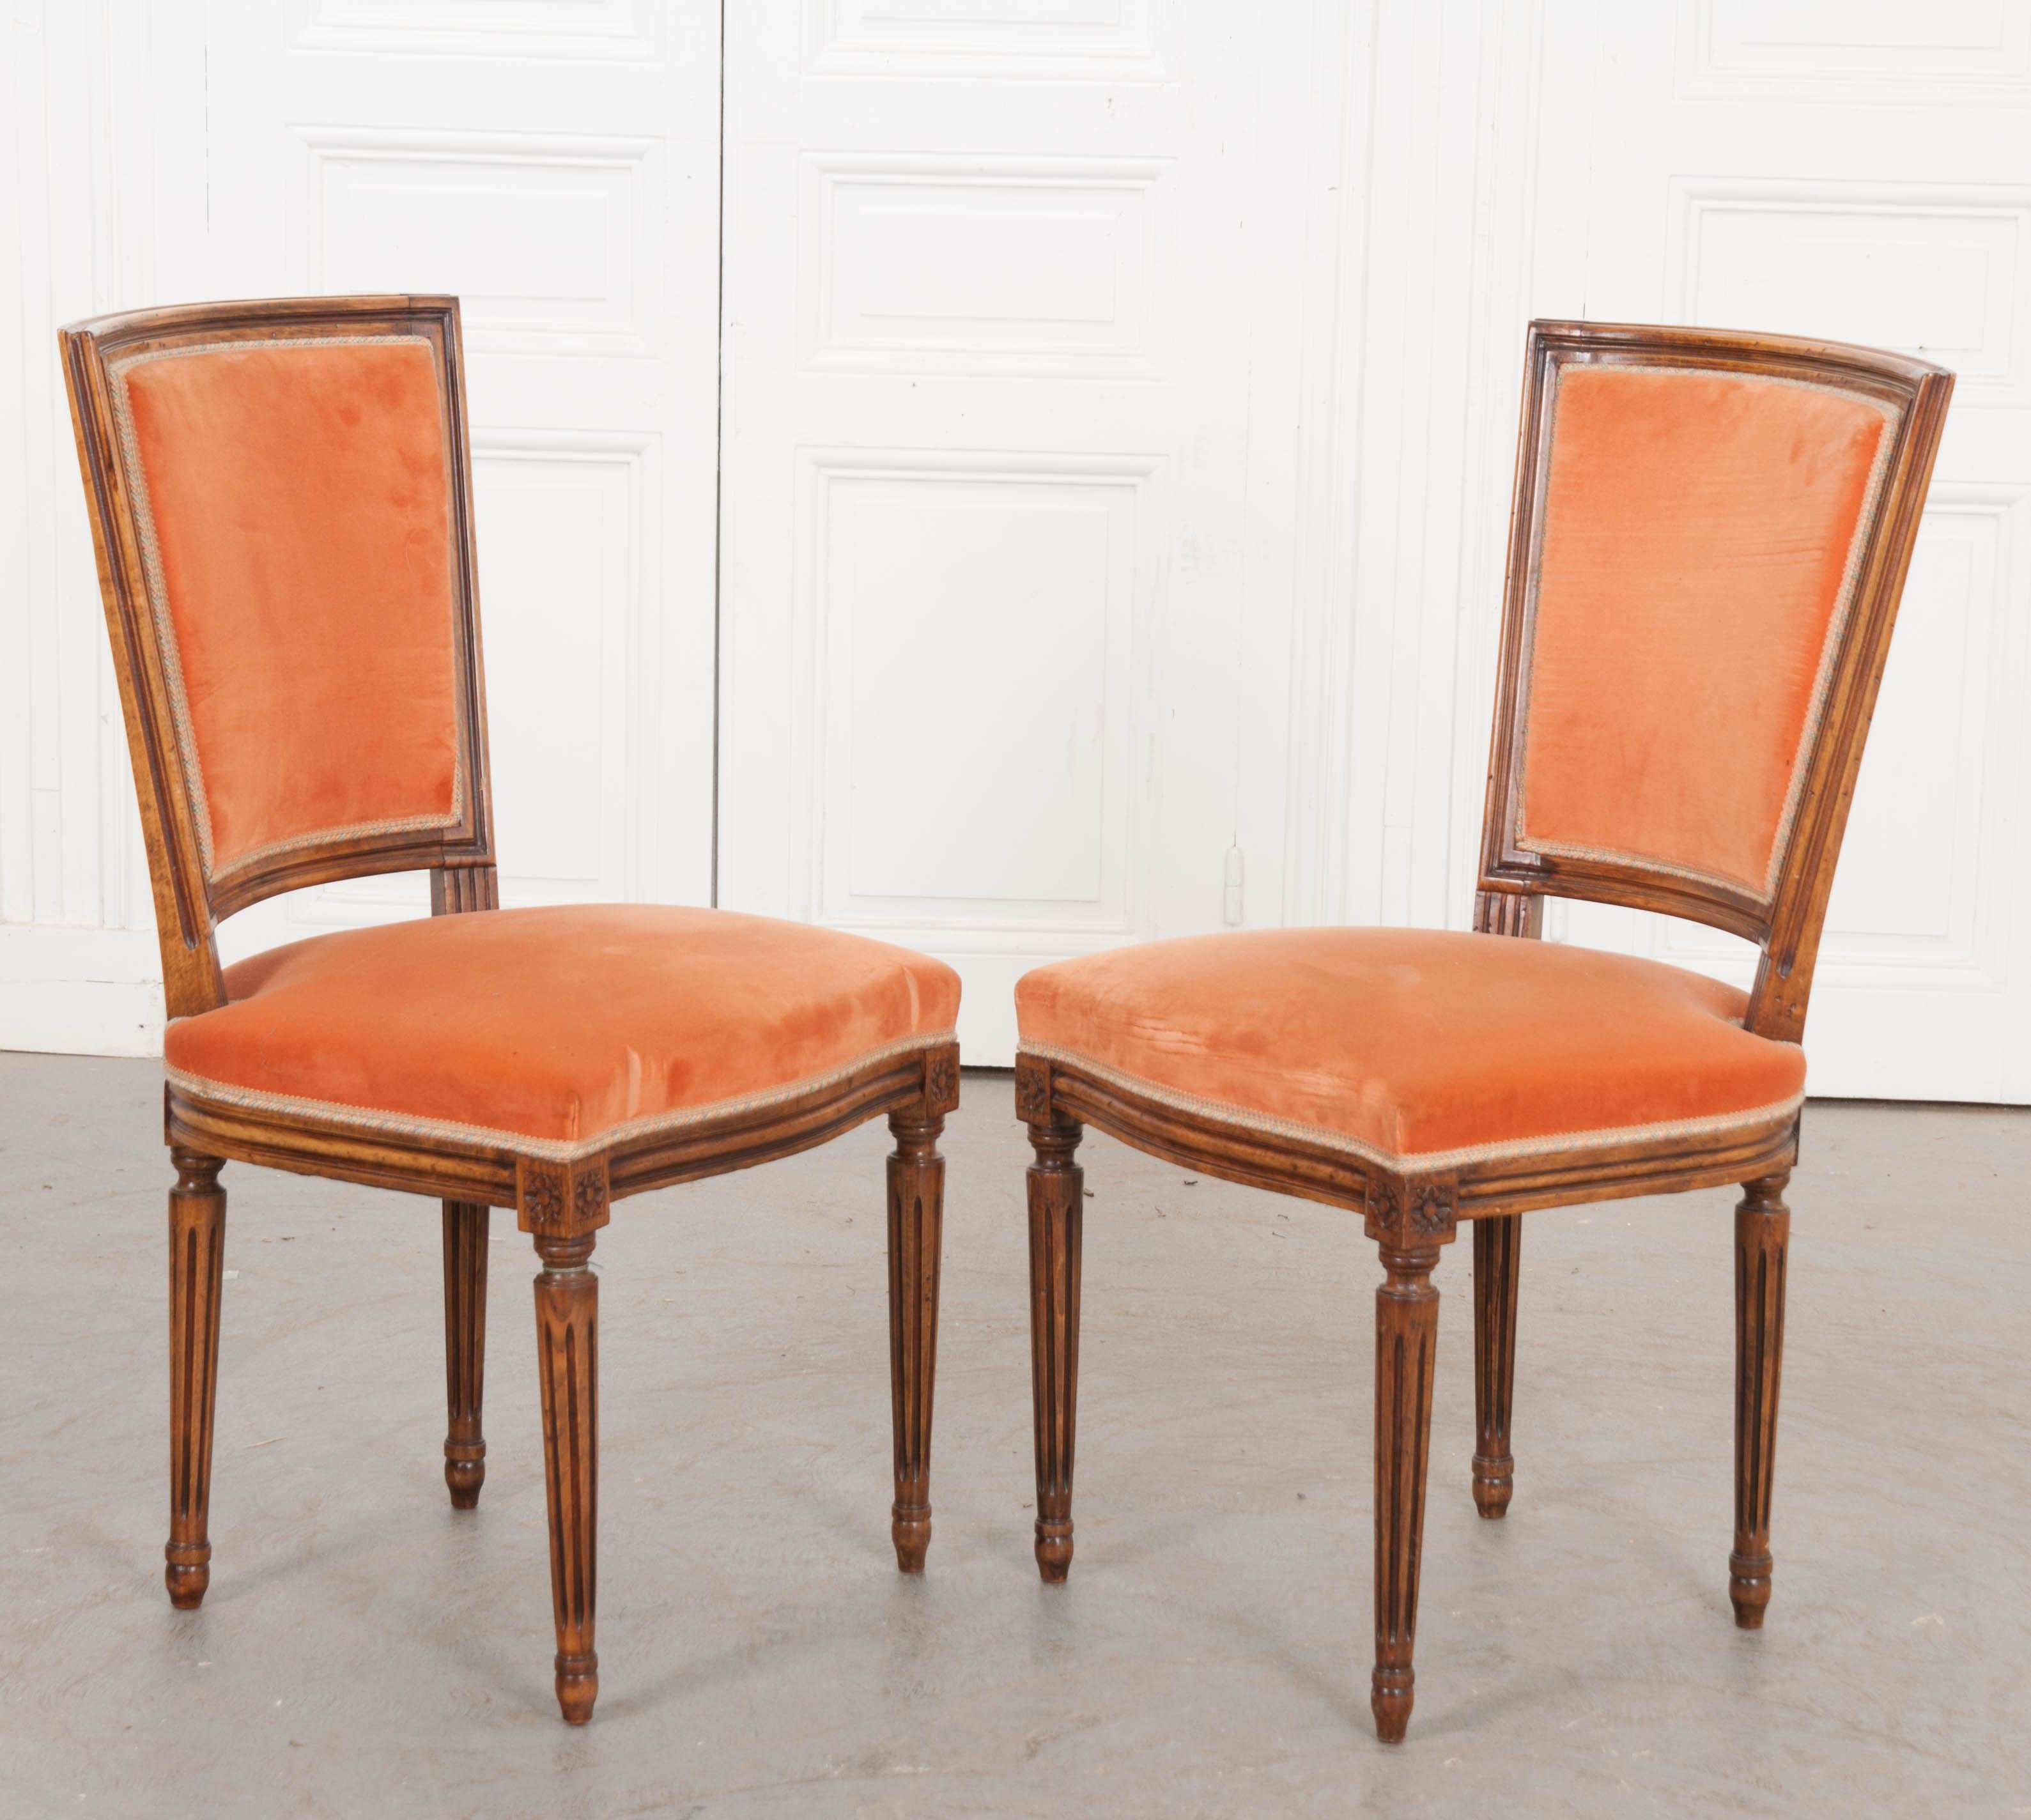 This great set of six Louis XVI style walnut side chairs, circa 1880, are from France and have rectangular tapering backs with fluted carving throughout. They are upholstered in a rich peach velvet.